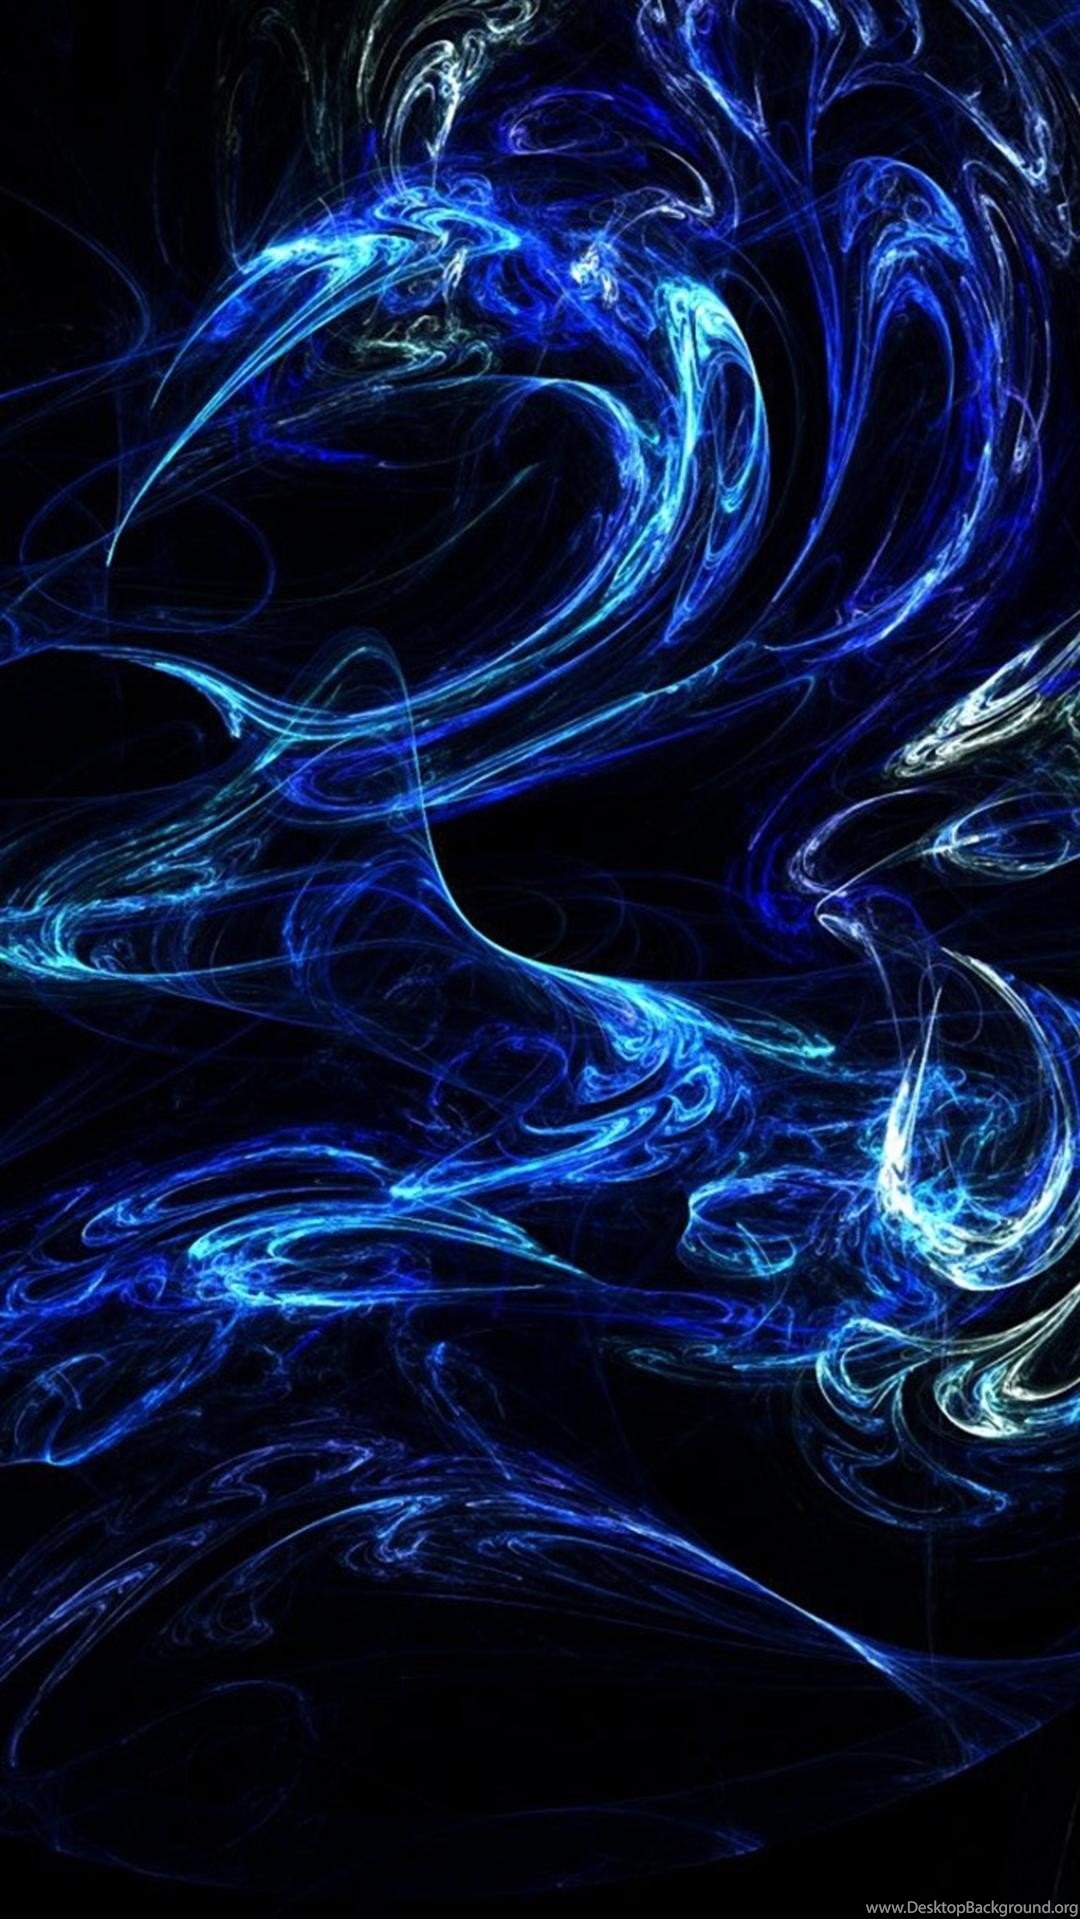 1080x1920 Vivo X5 Max Wallpaper: Blue Smoke Android Wallpapers Mobile Android .